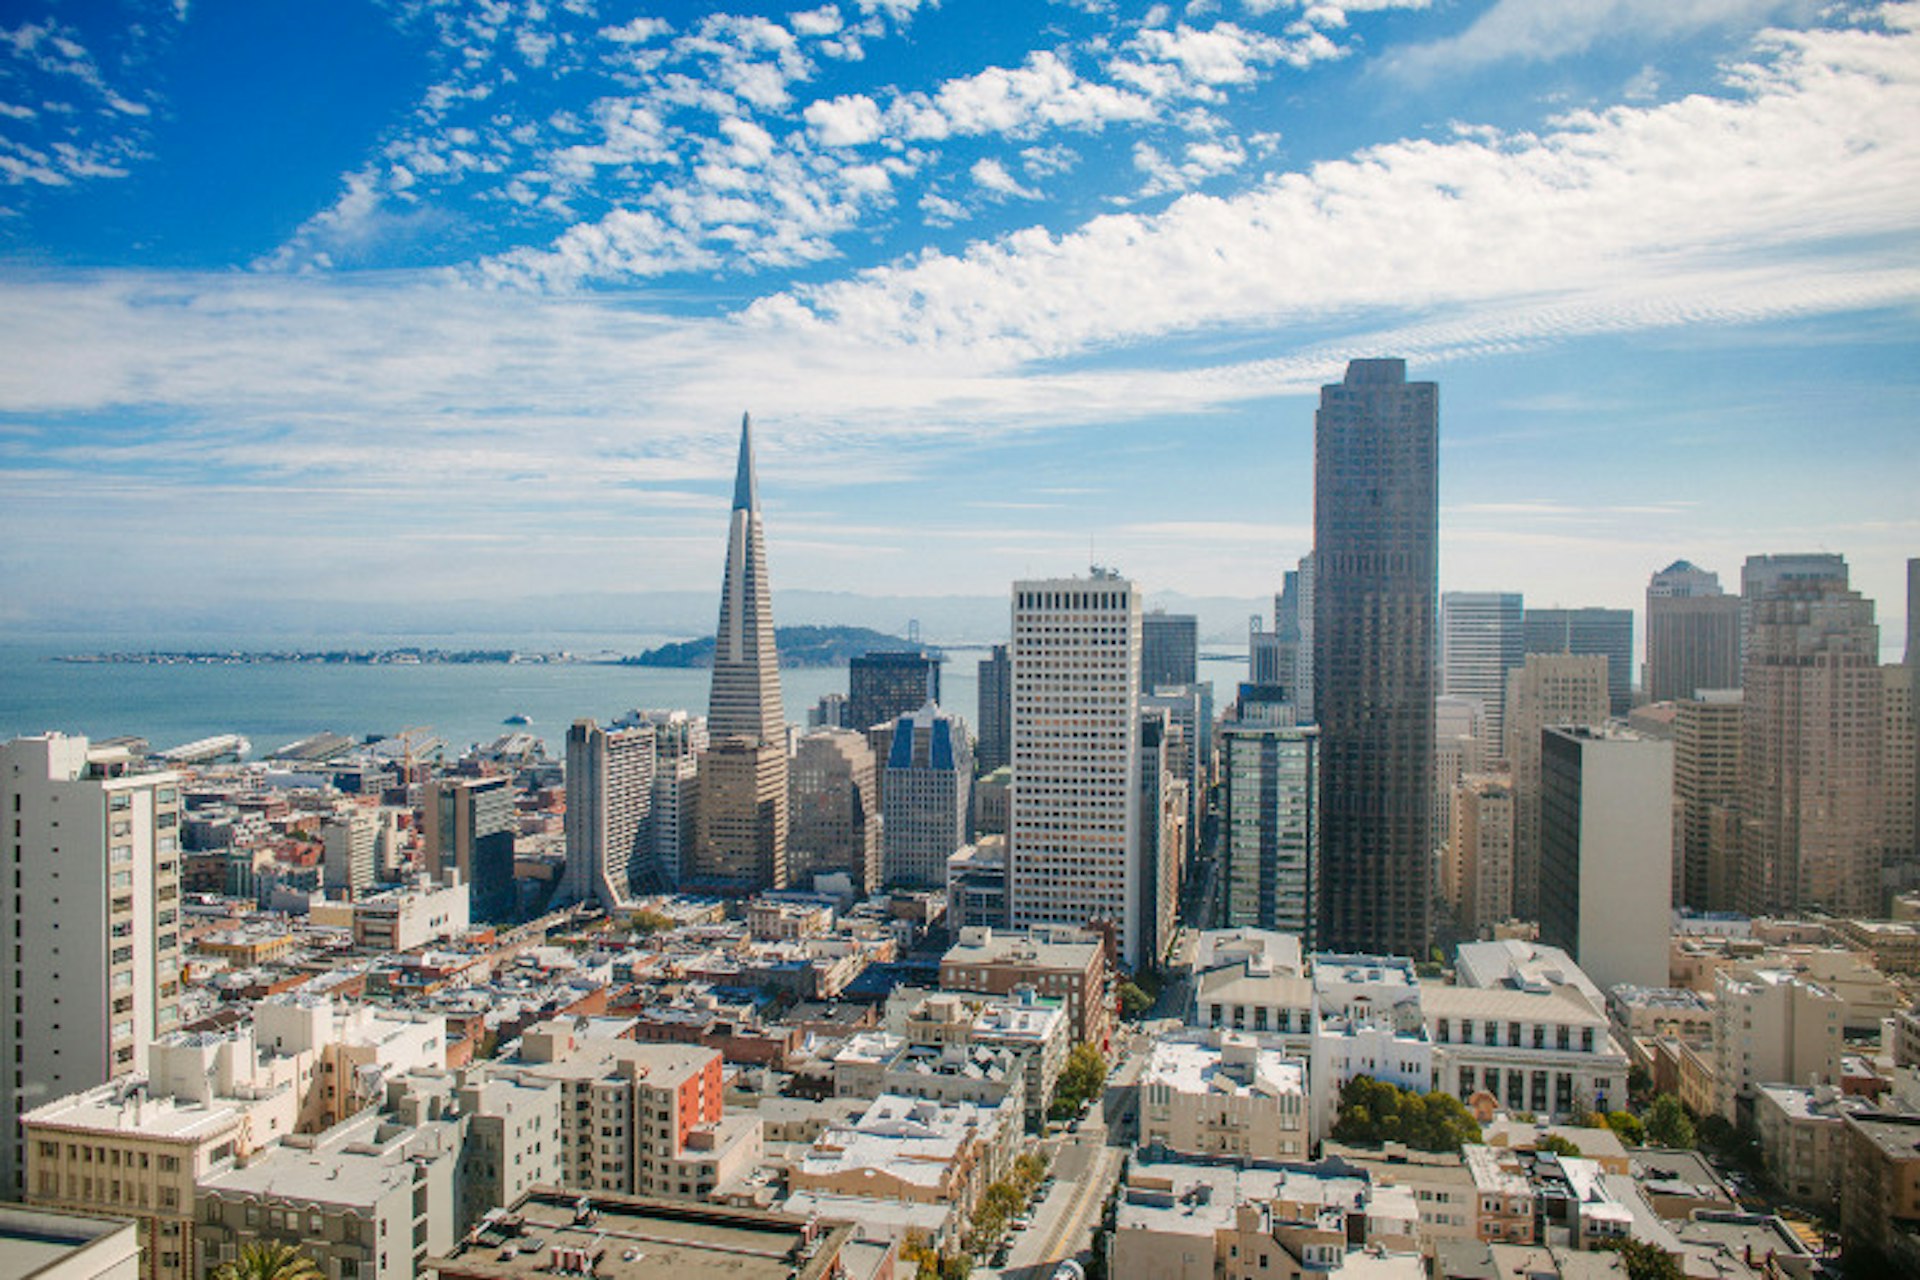 Perfect weather for a perfect day in San Francisco. Image by Kristine T Pham Photography / Moment / Getty